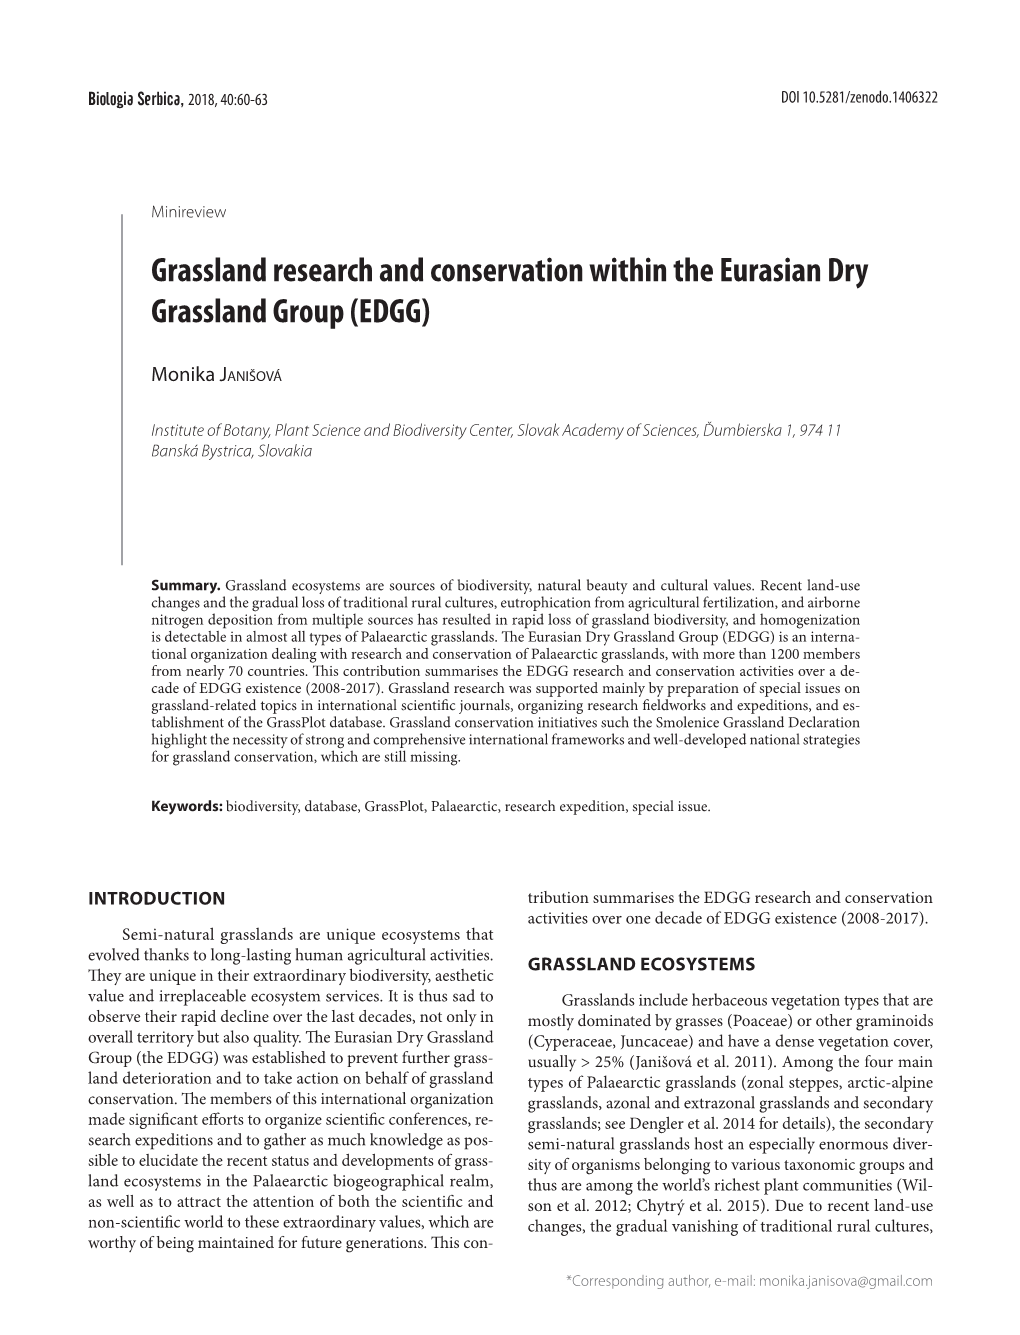 Grassland Research and Conservation Within the Eurasian Dry Grassland Group (EDGG)